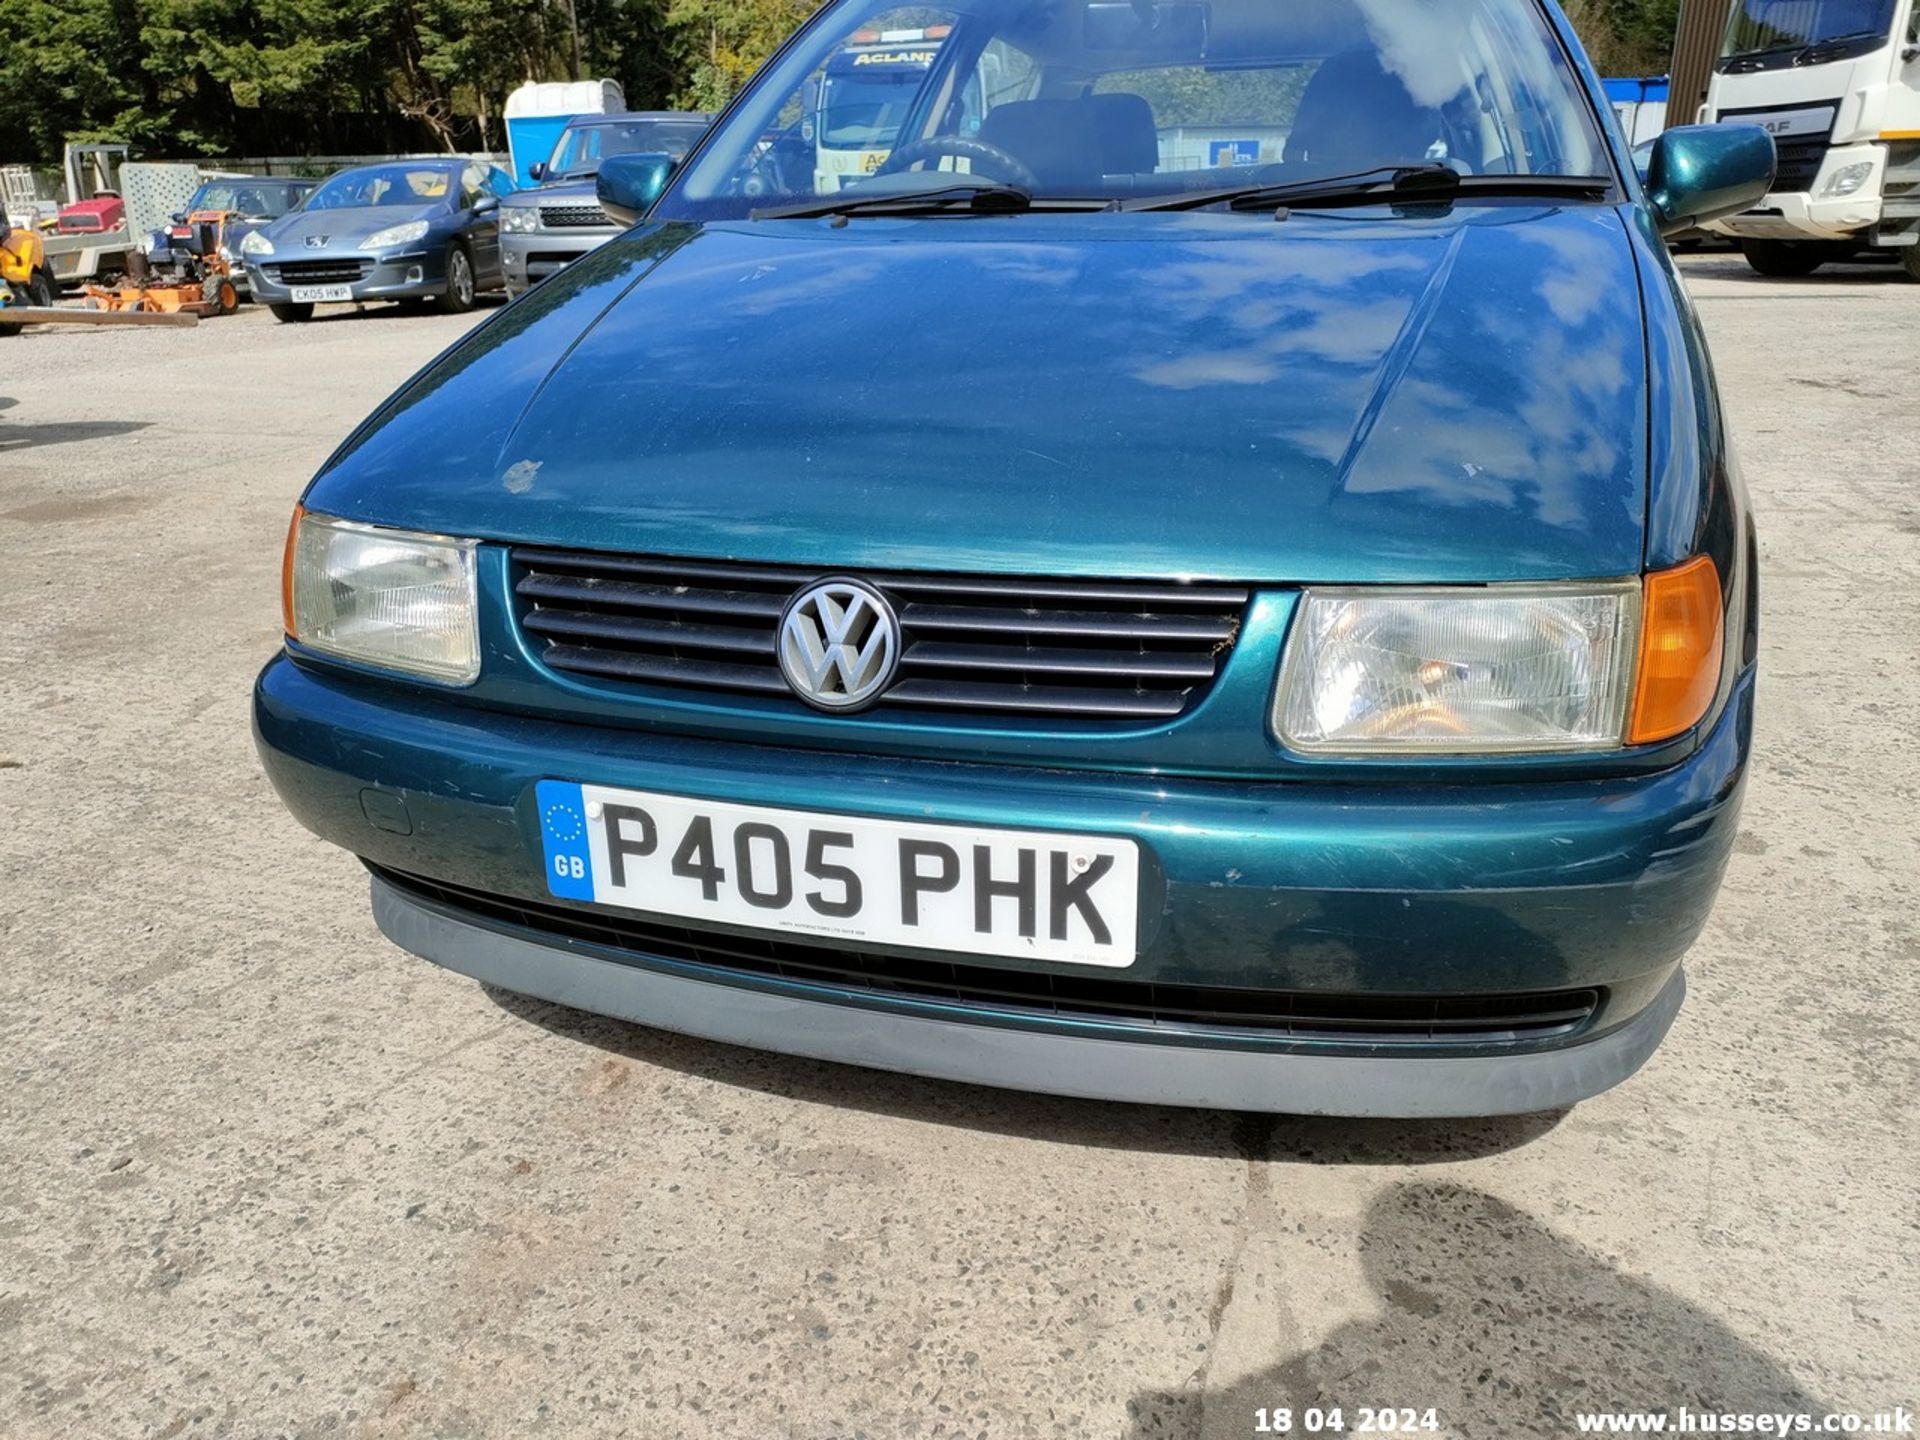 1997 VOLKSWAGEN POLO 1.4 CL AUTO - 1390cc 3dr Hatchback (Green, 68k) - Image 10 of 60